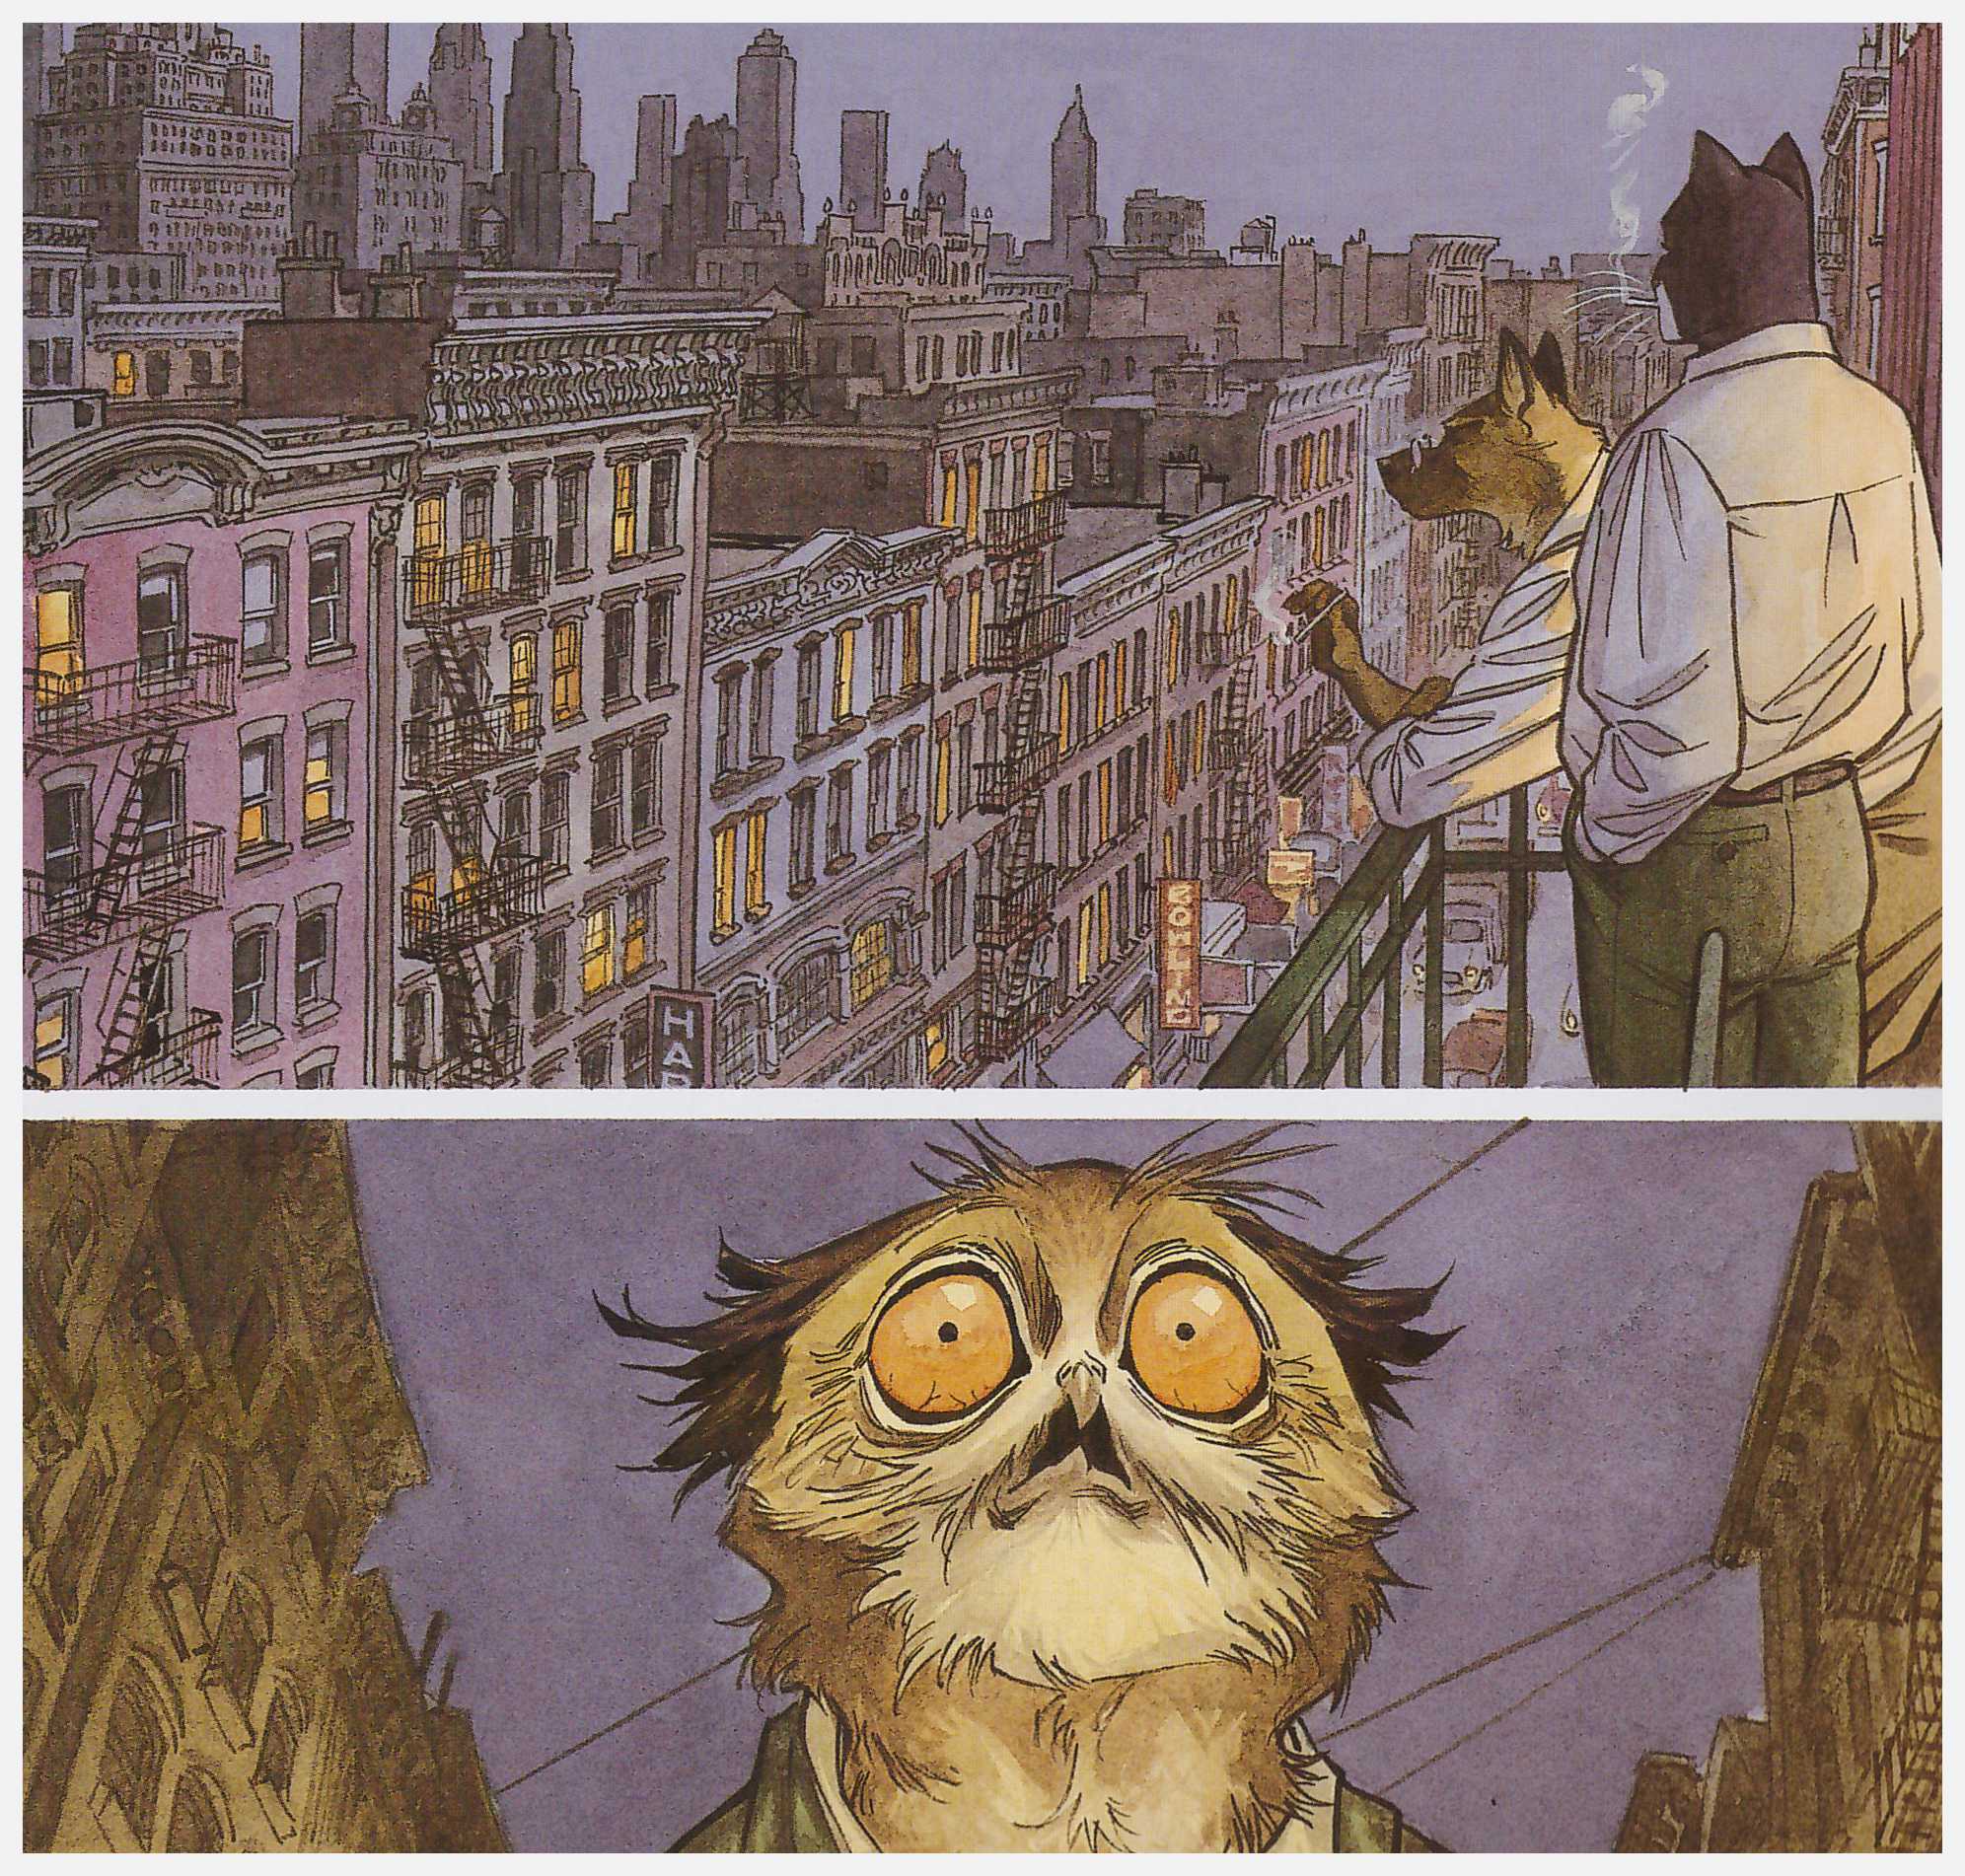 Blacksad Somewhere Within the Shadows review